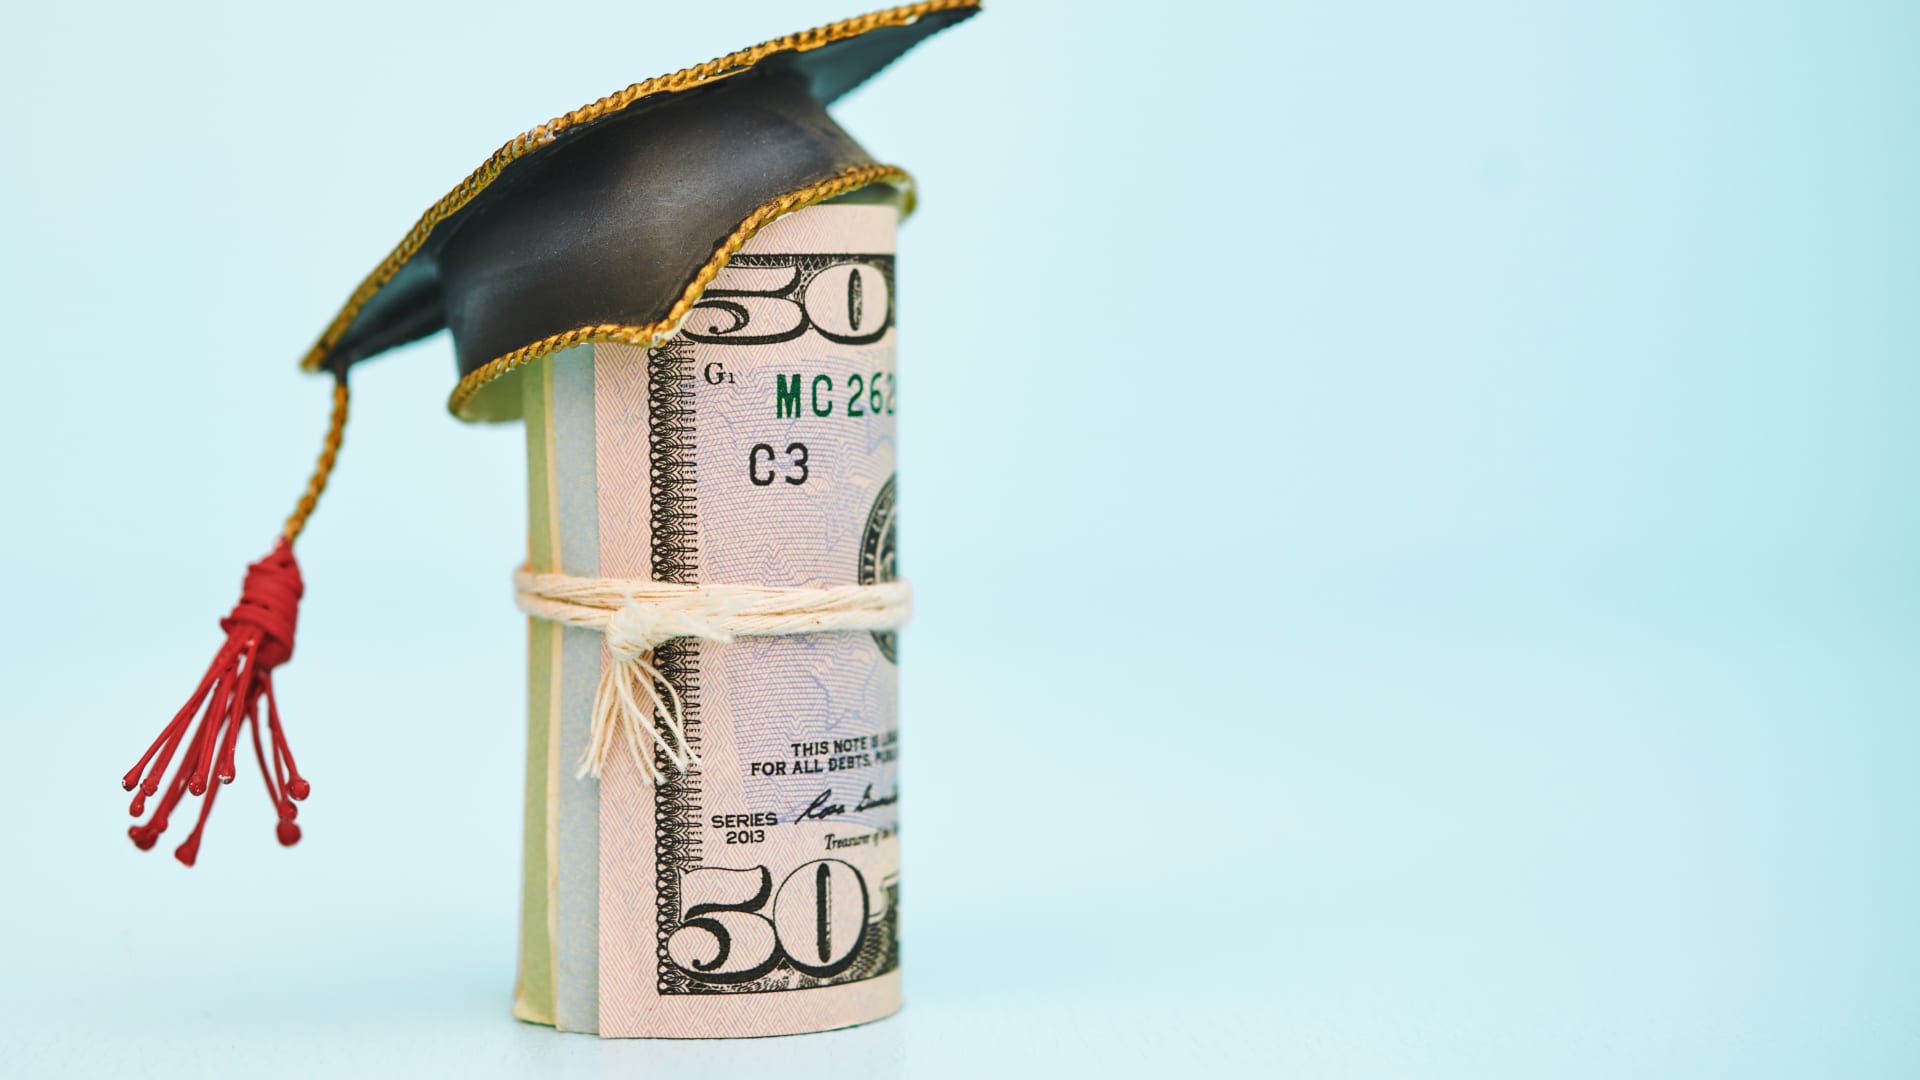 You should still apply for student loan forgiveness despite taxes